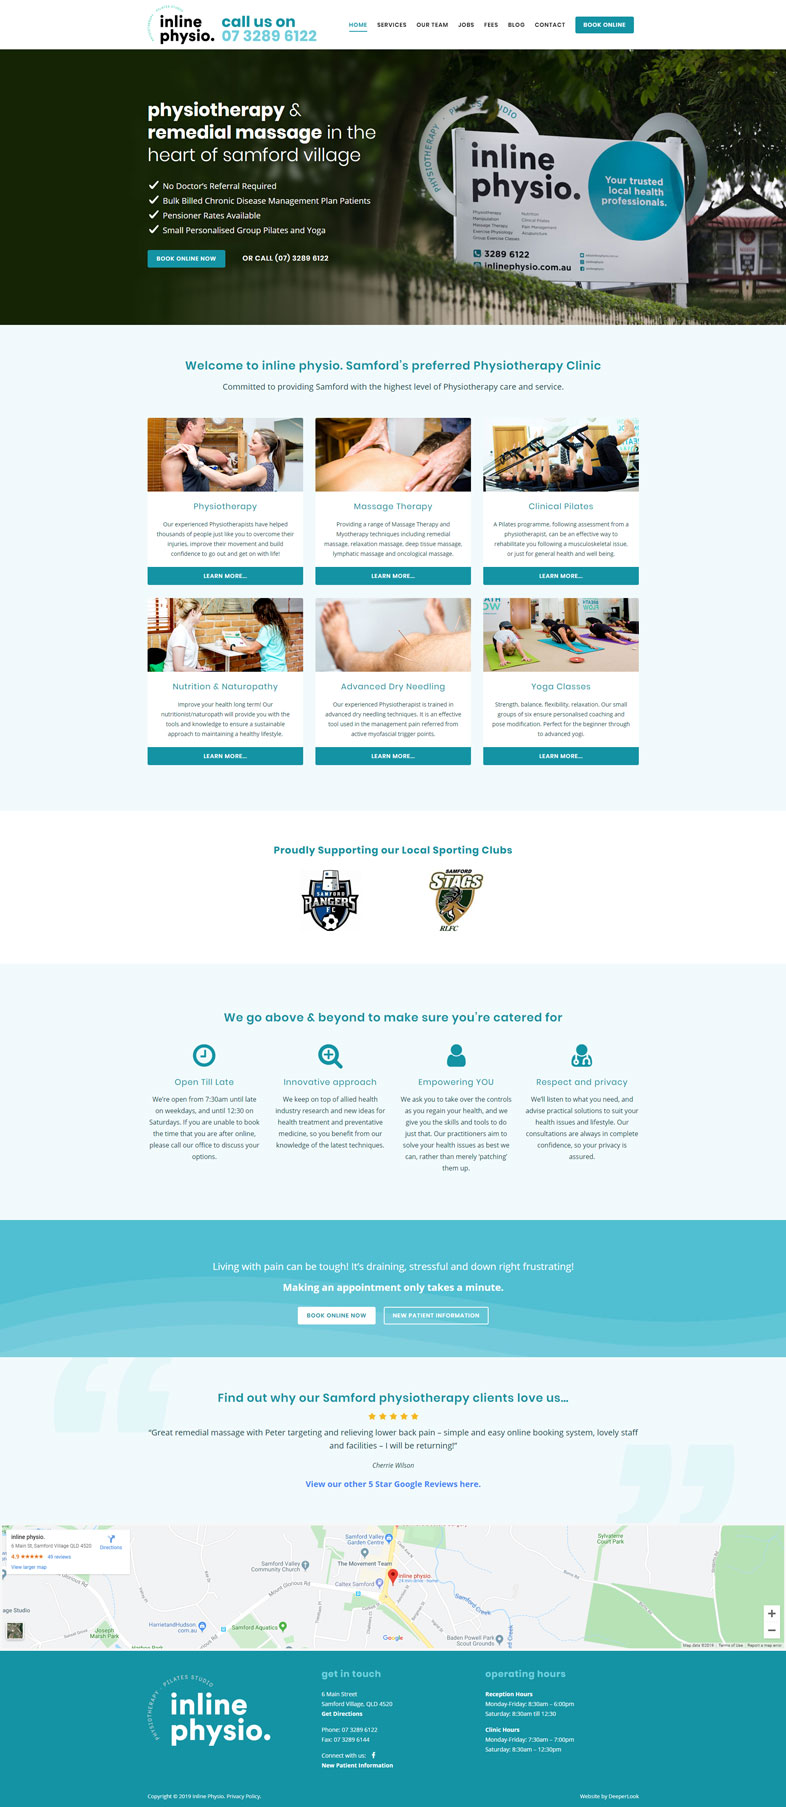 Inline physio's website design of the homepage